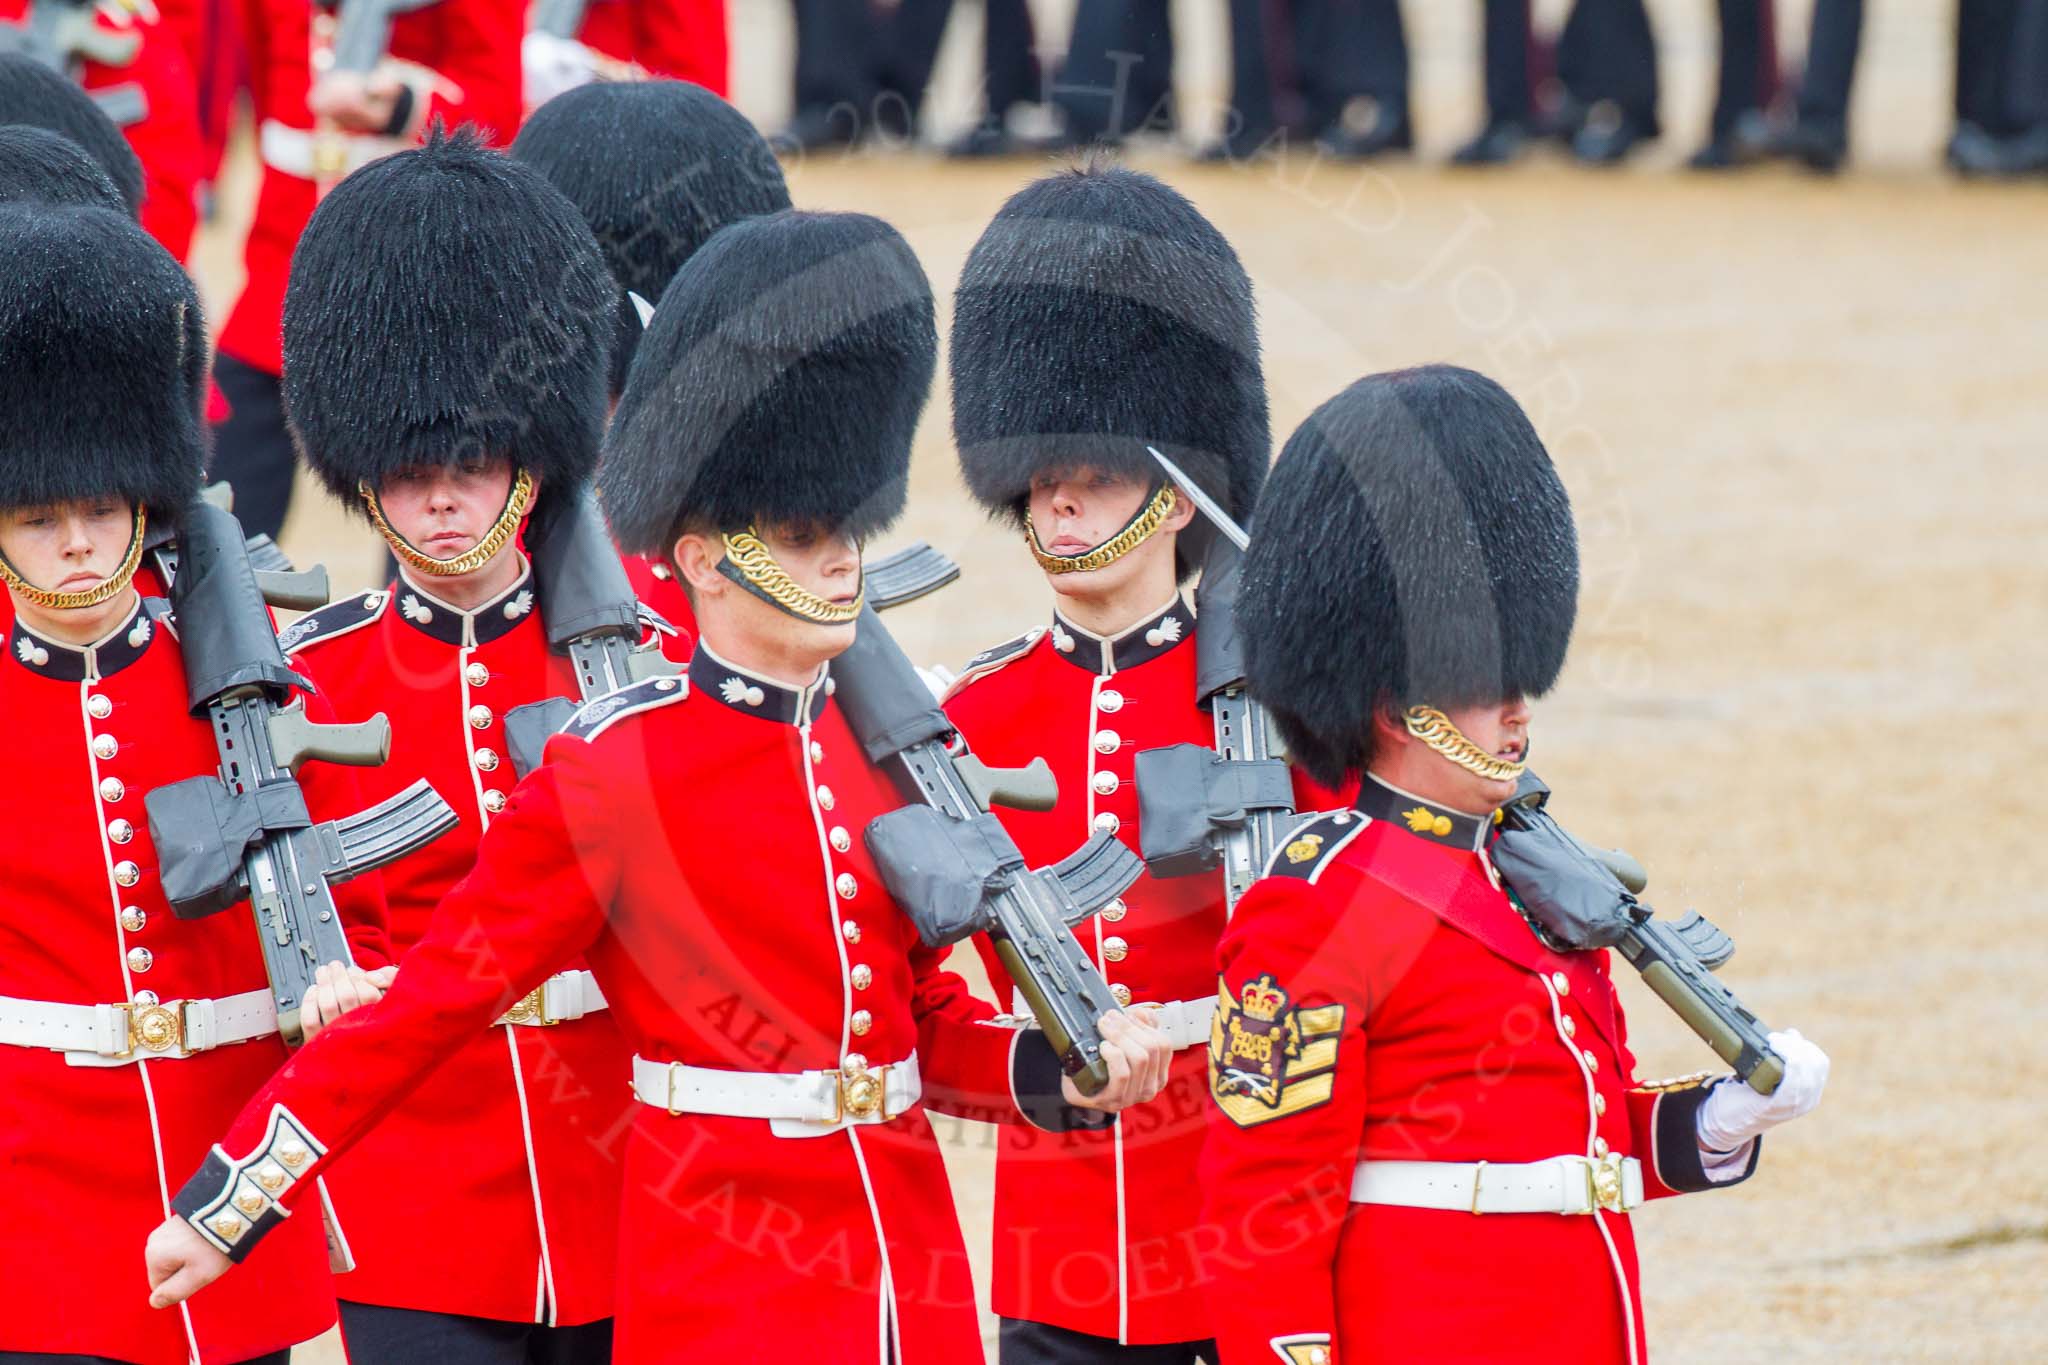 The Colonel's Review 2014.
Horse Guards Parade, Westminster,
London,

United Kingdom,
on 07 June 2014 at 11:43, image #543